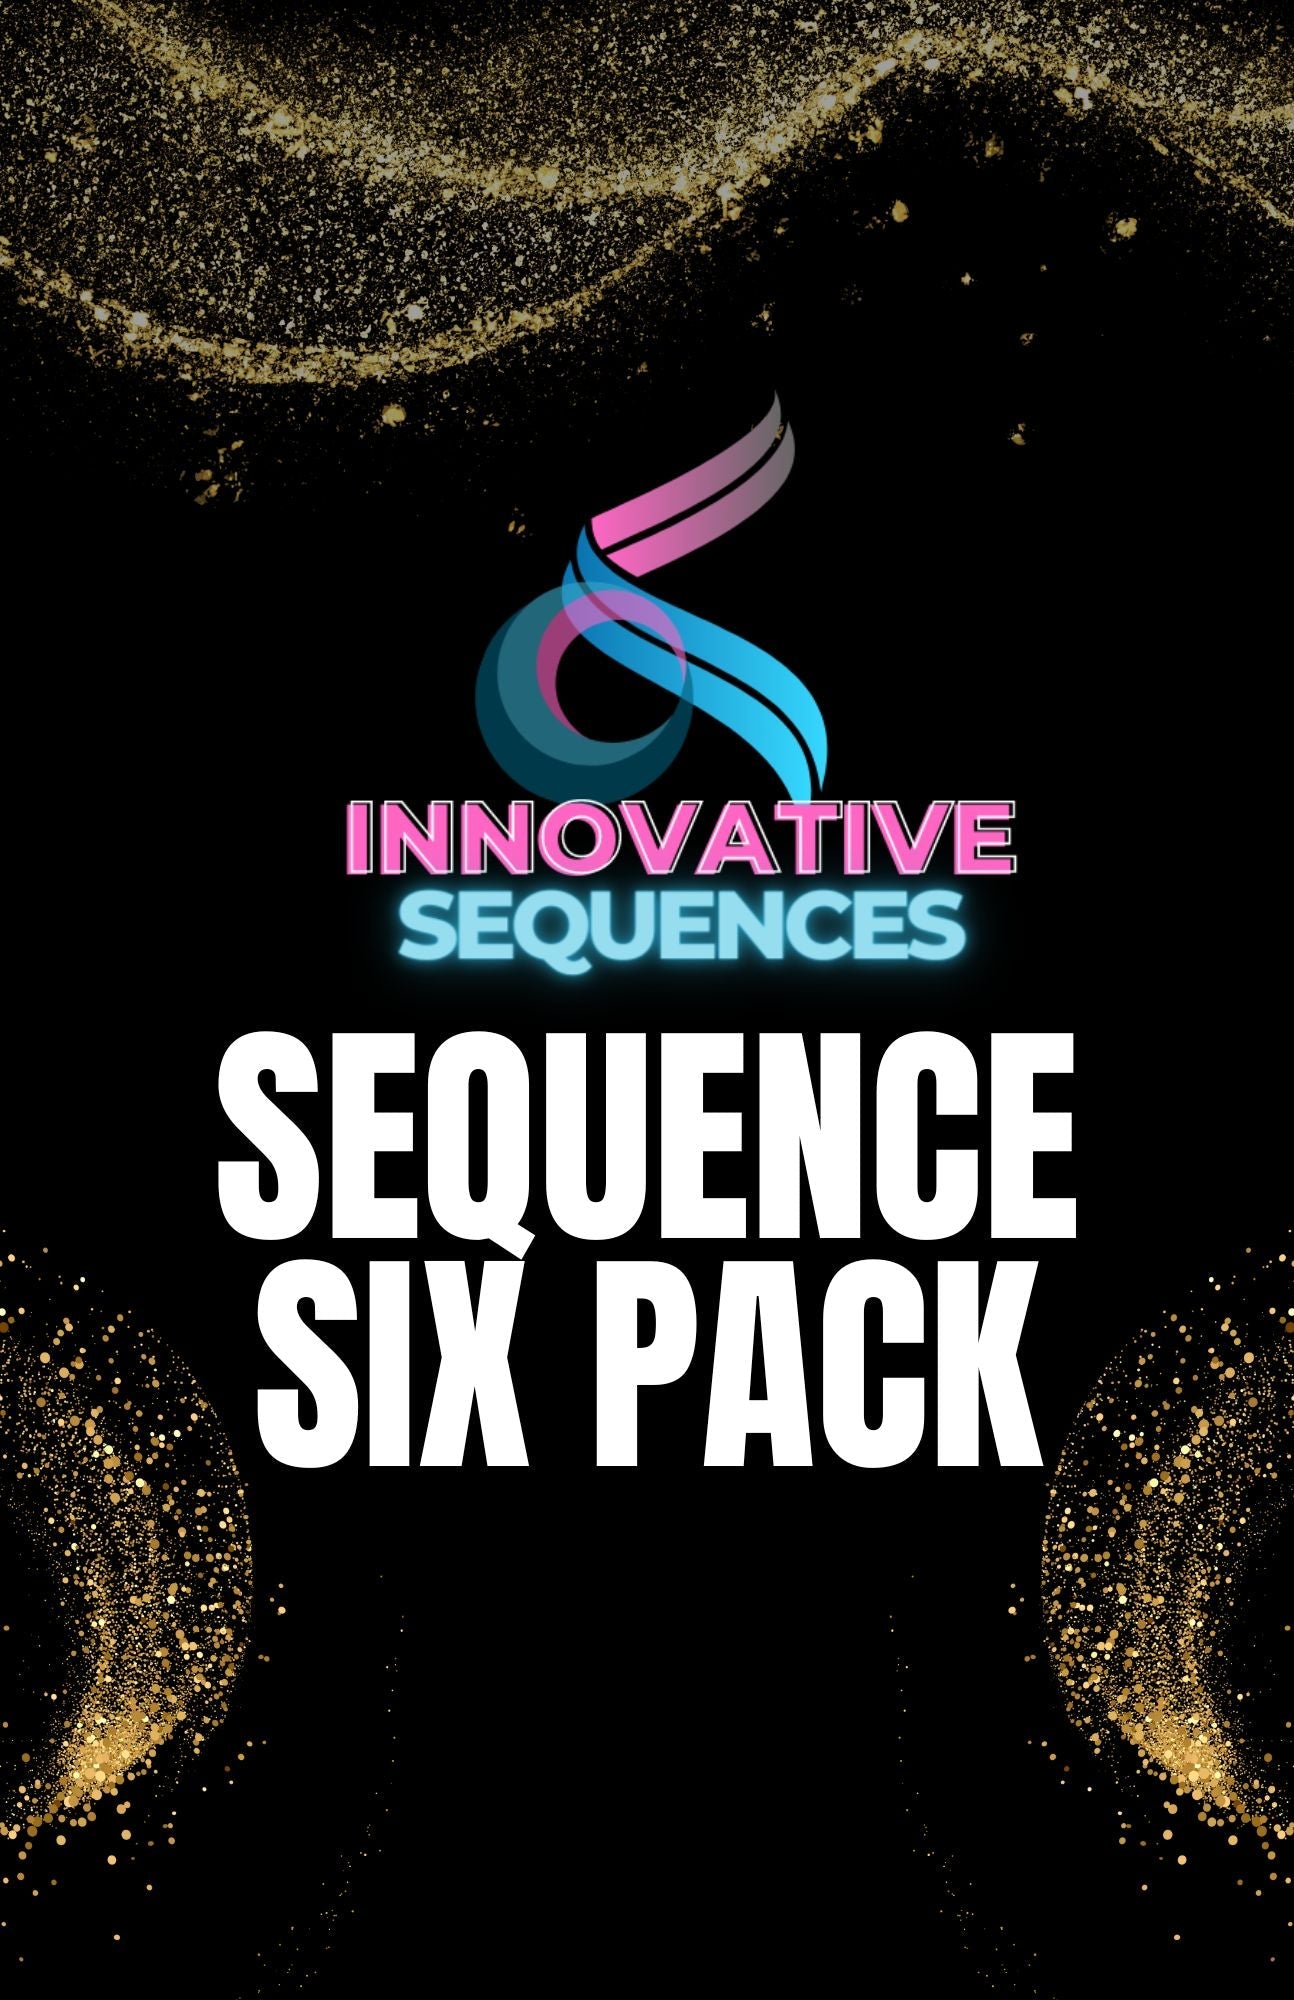 Sequence Six Pack